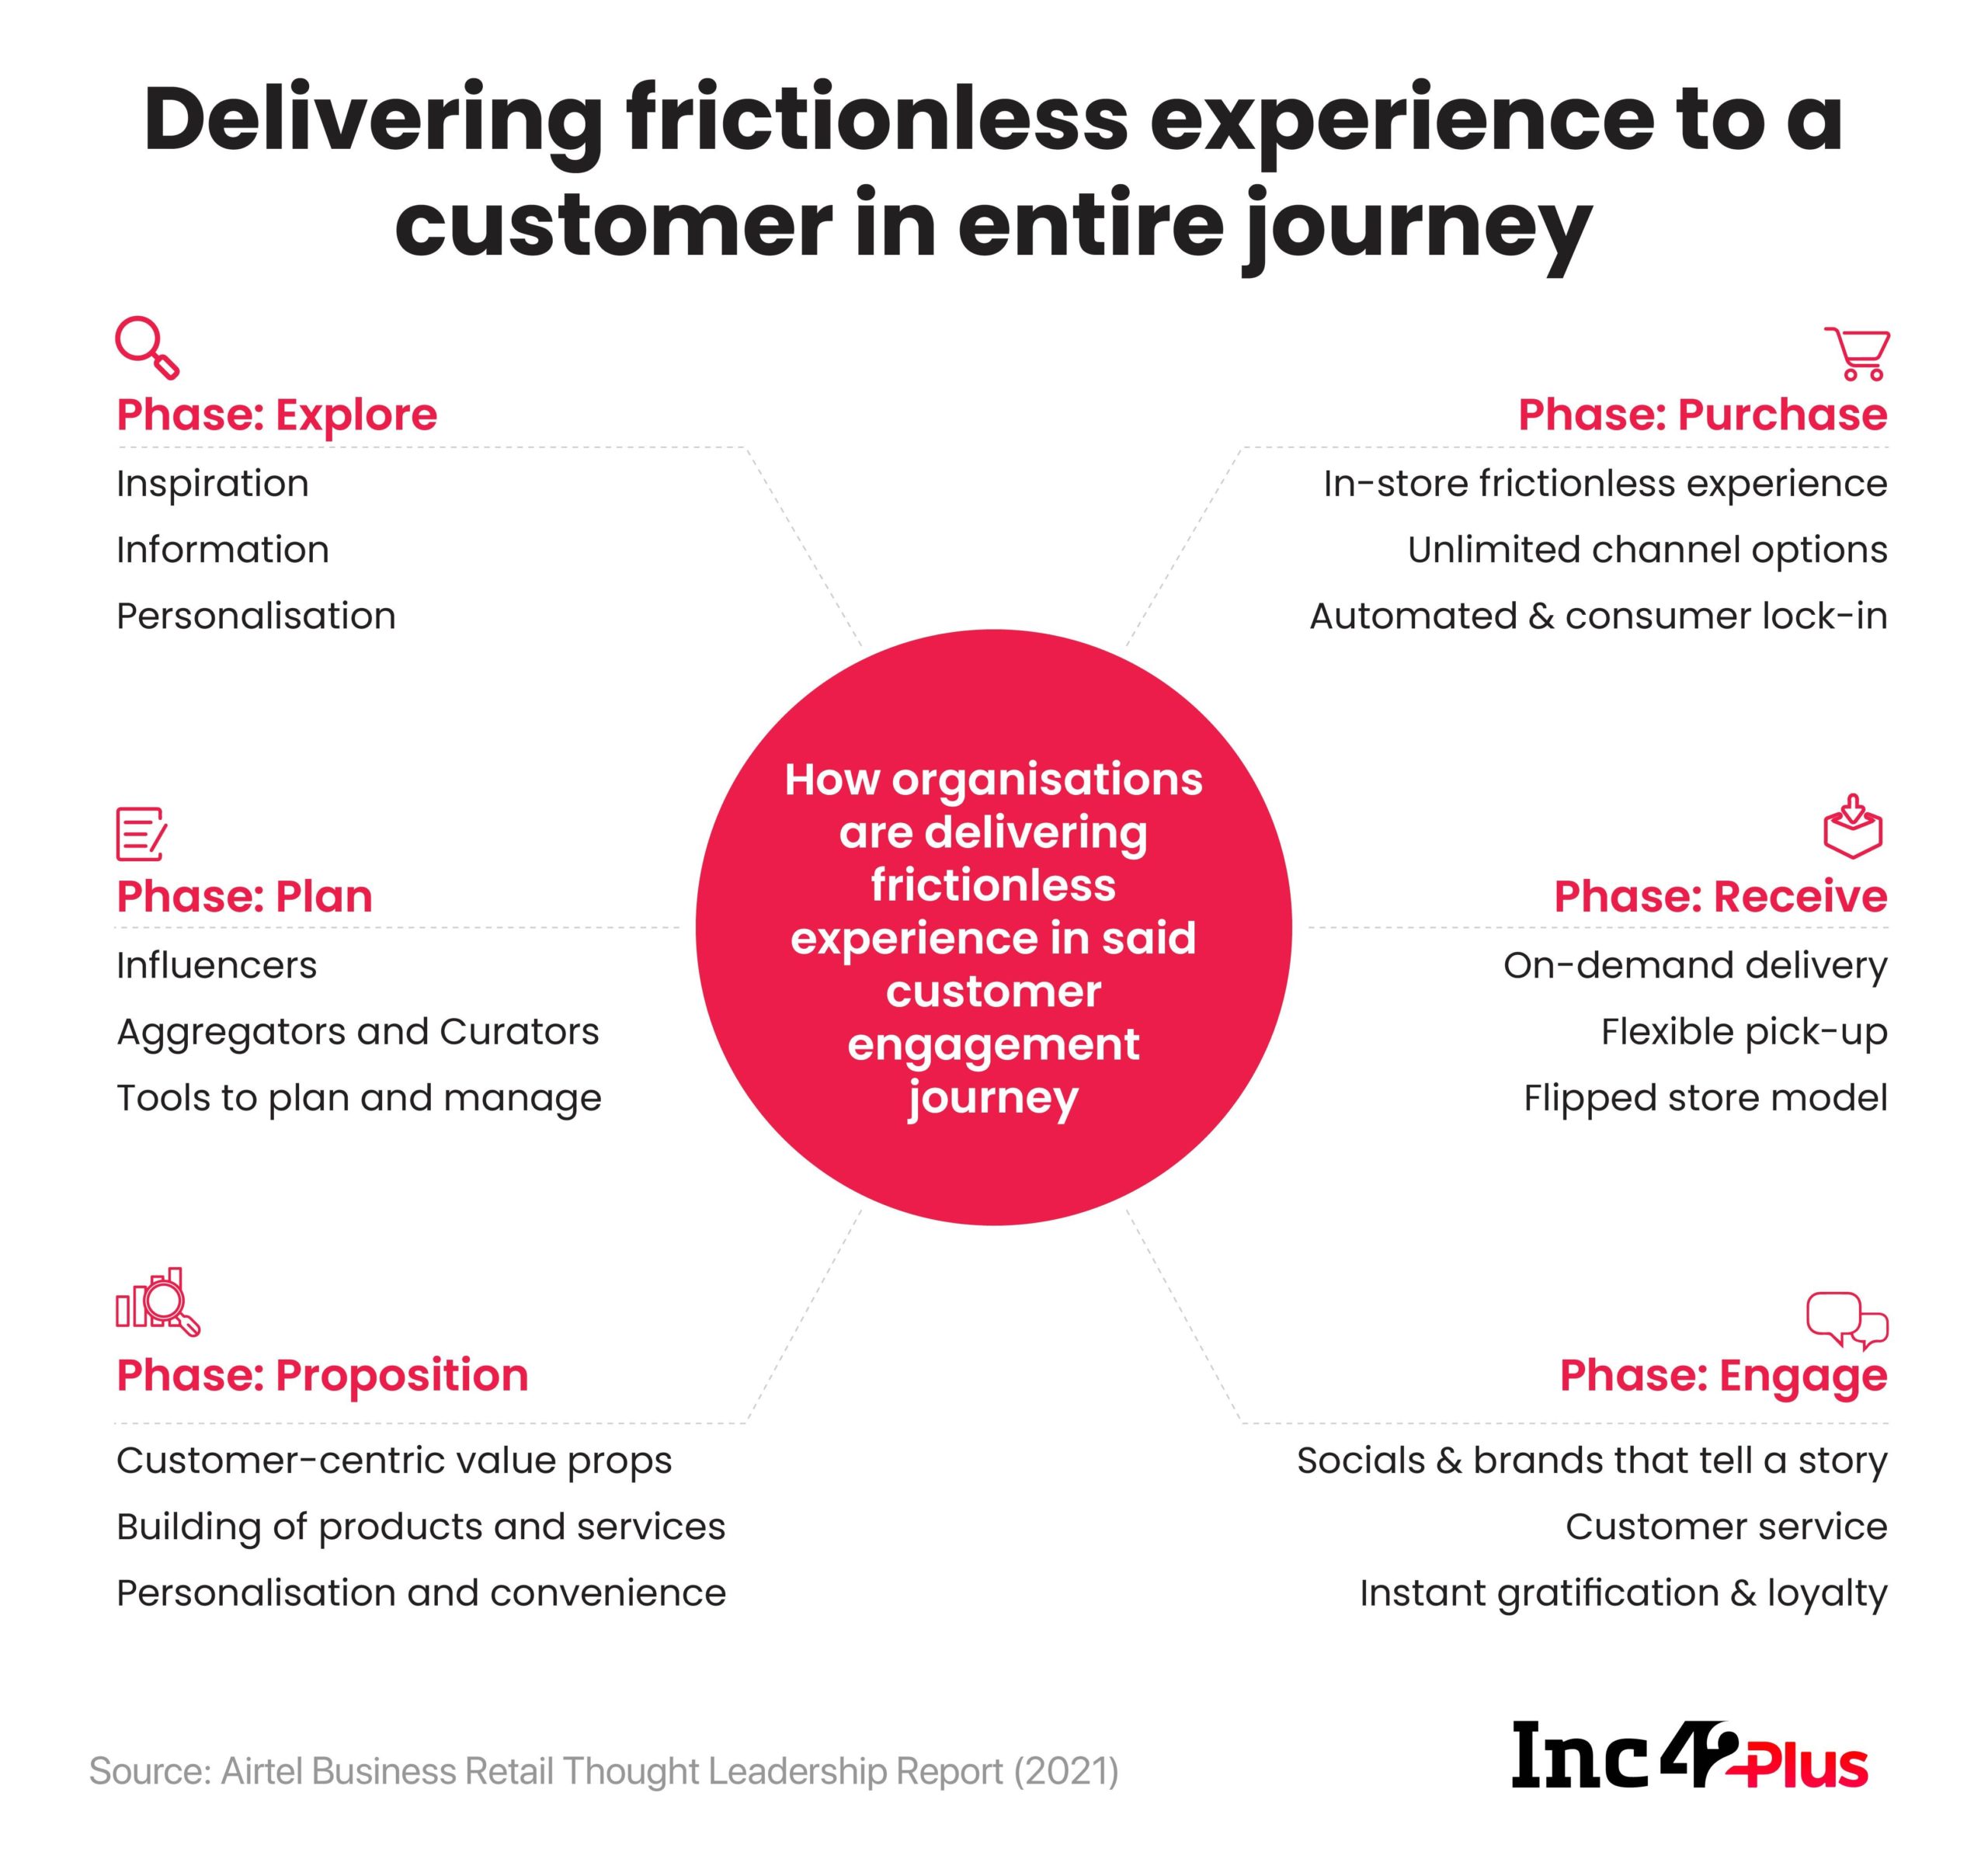 DELIVERING FRICTIONLESS EXPERIENCE TO A CUSTOMER IN ENTIRE JOURNEY